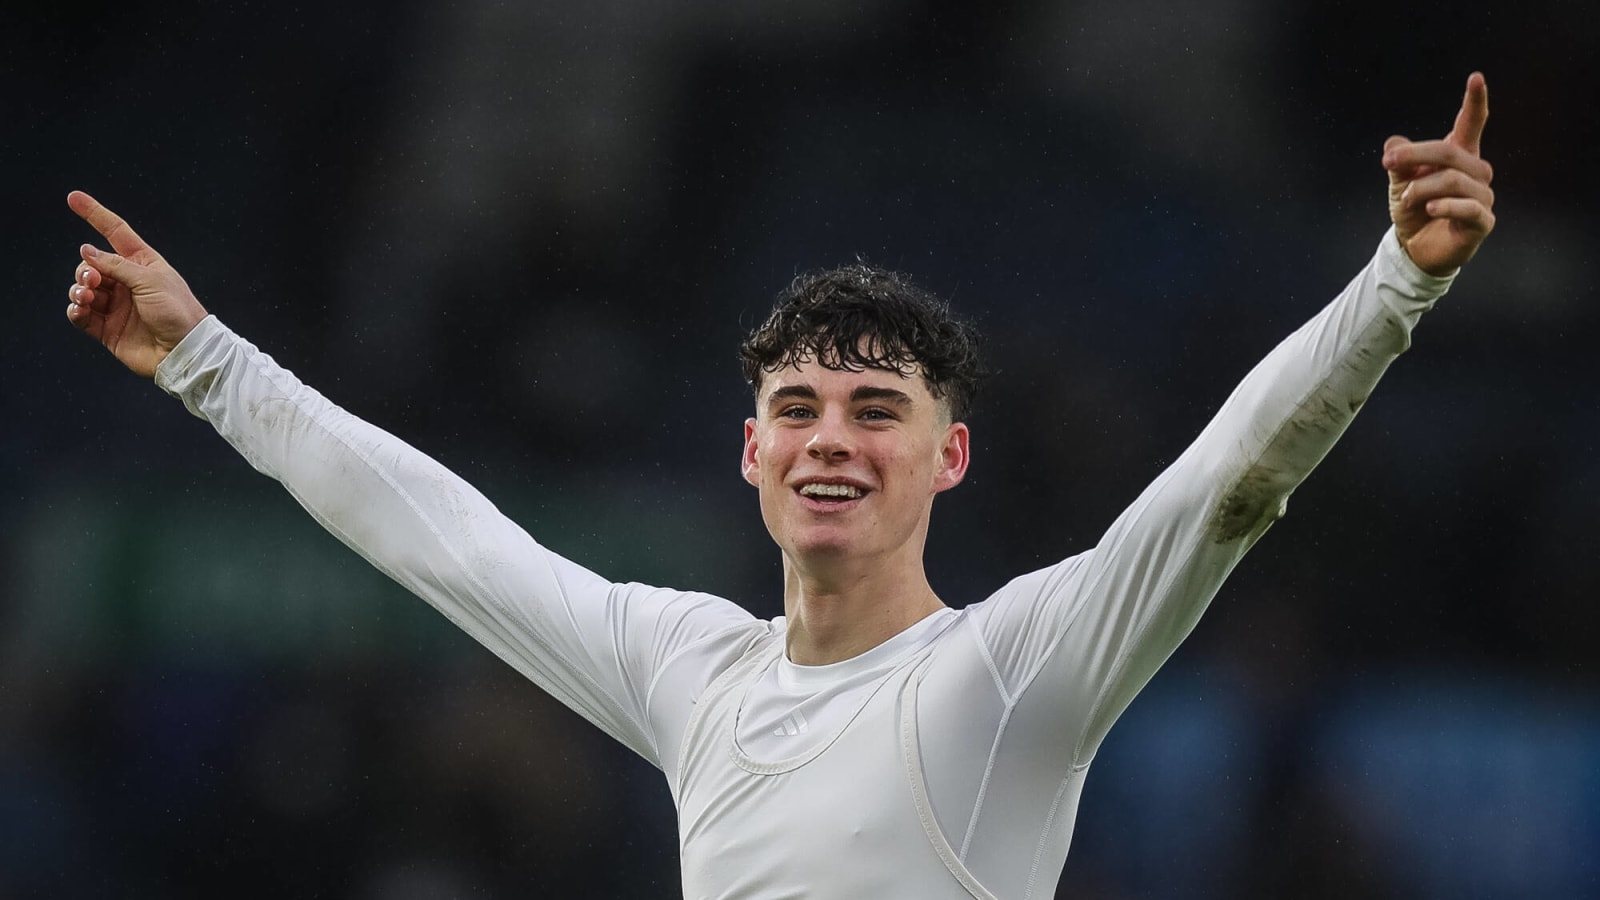 Leeds United starlet added to Manchester United’s radar after impressing in Championship